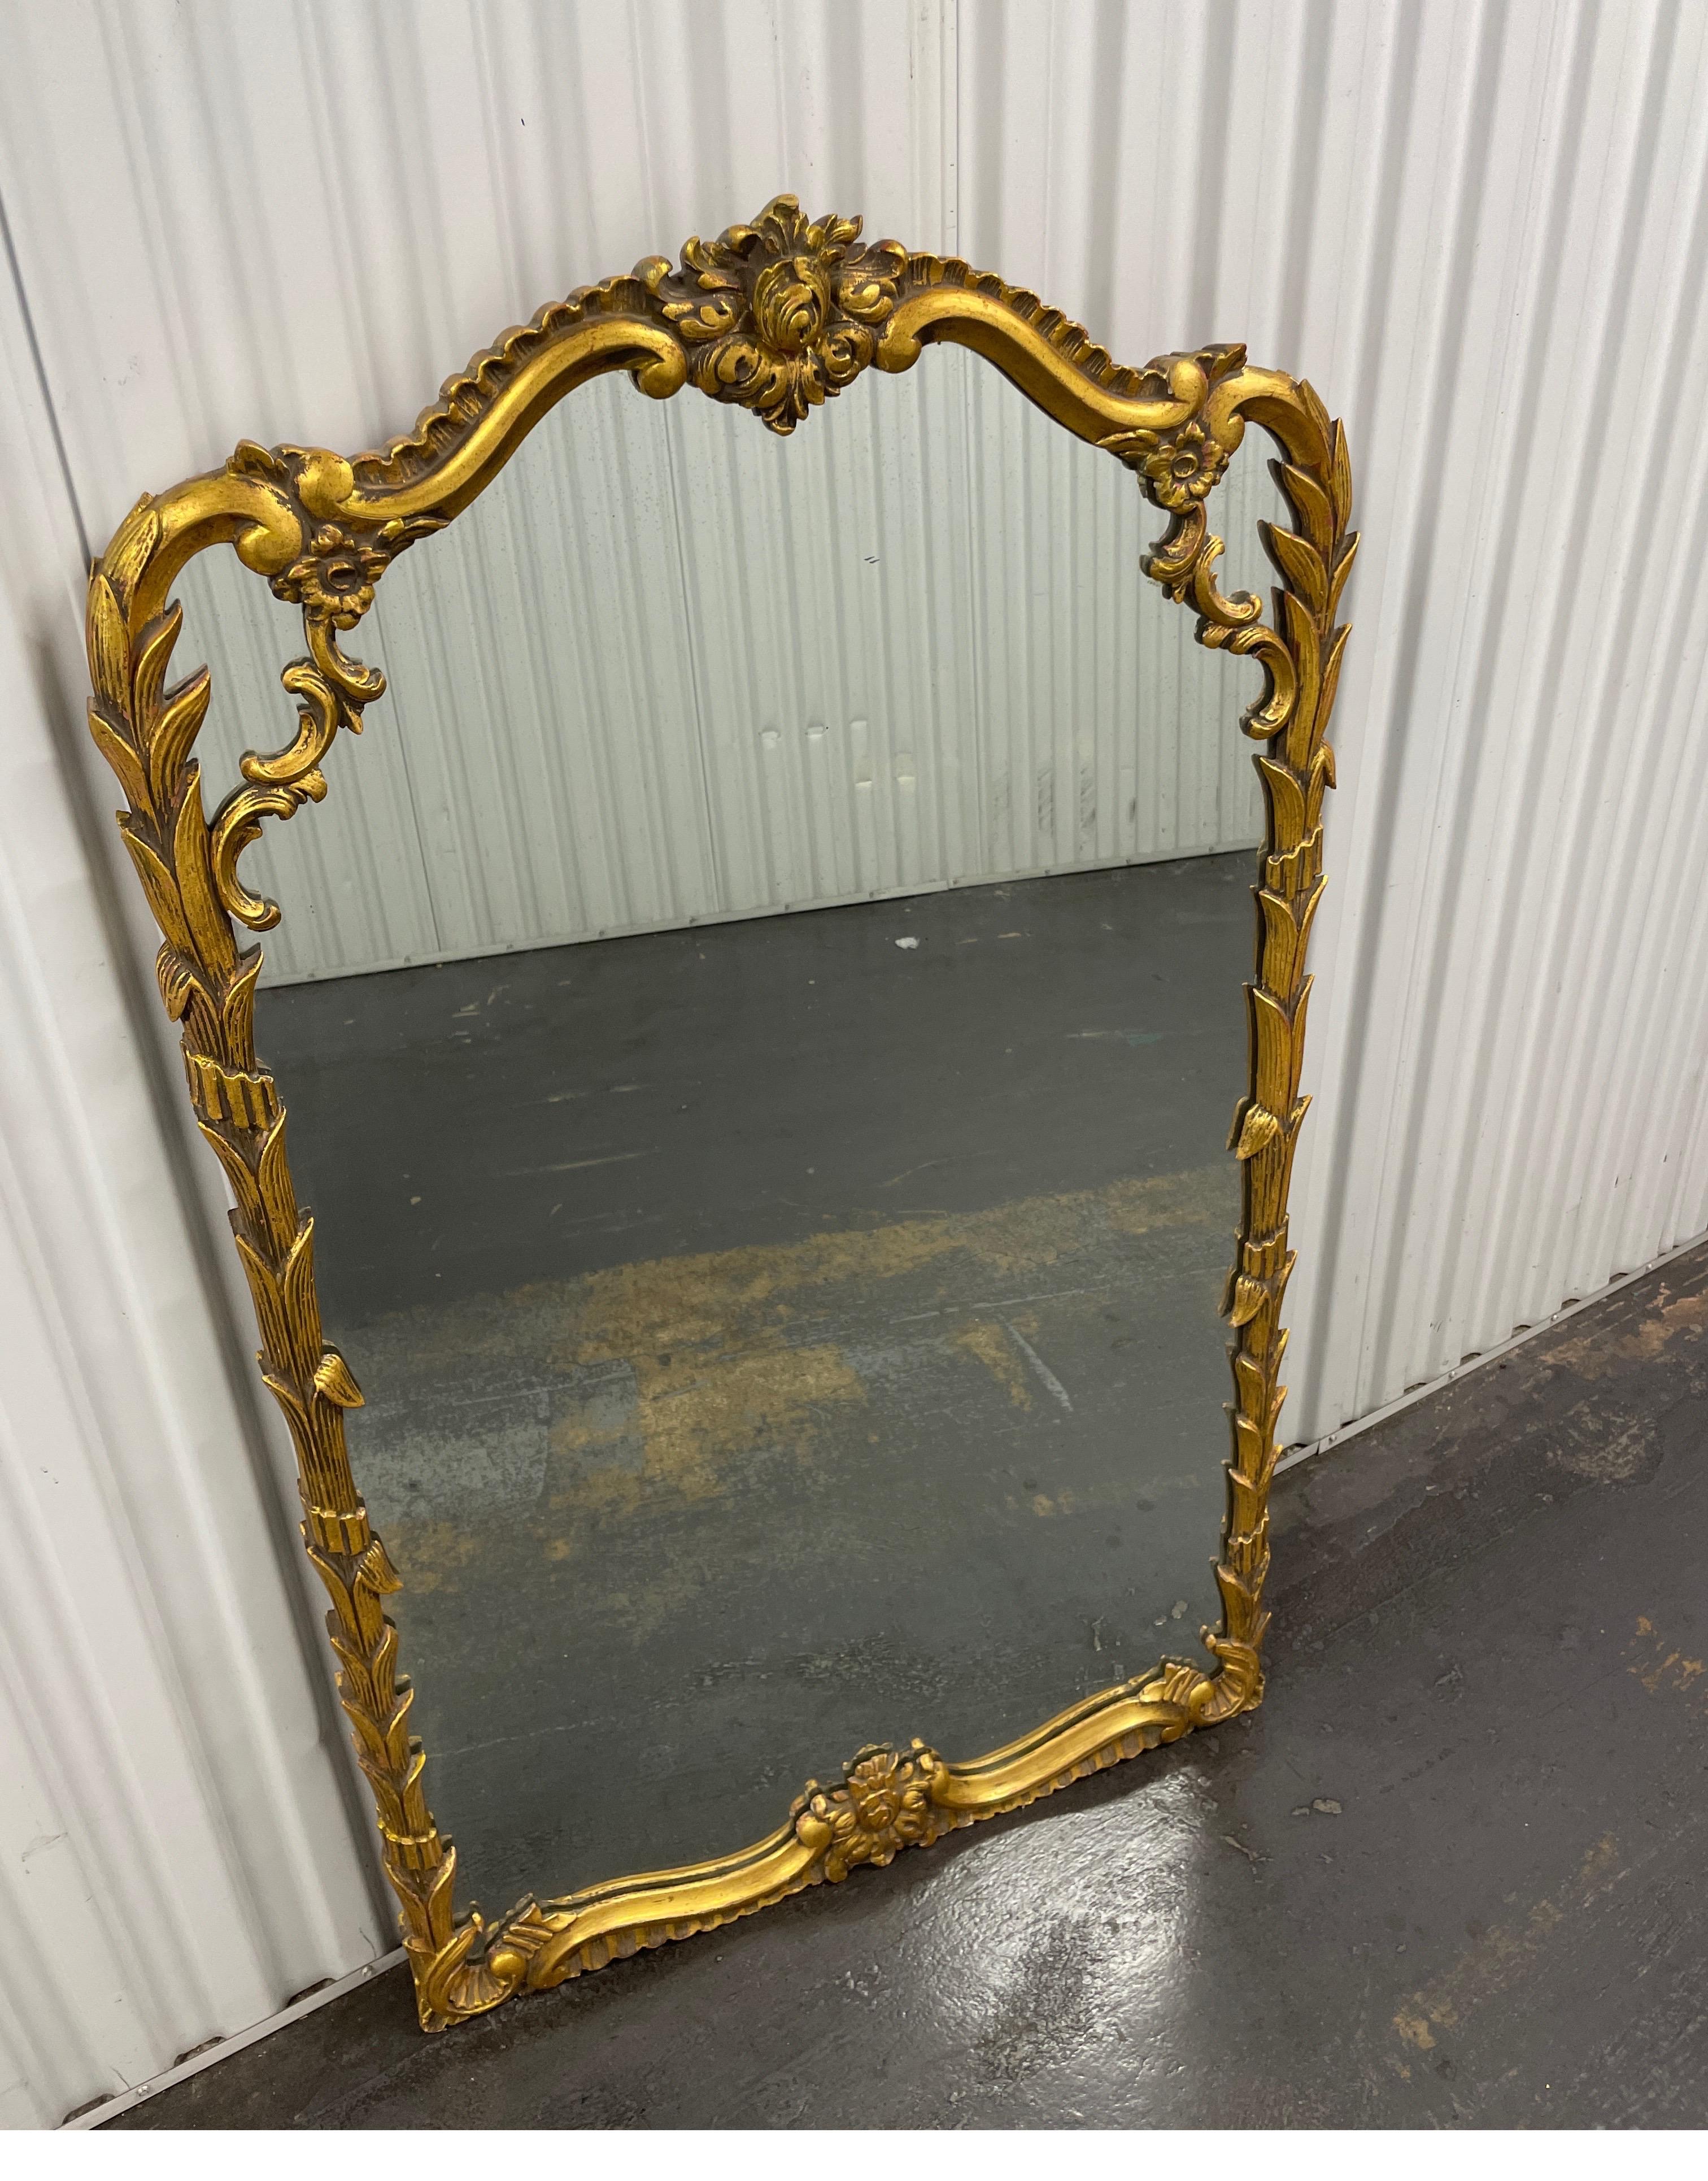 Vintage carved and gilded Italian wall mirror with leaves & flowers.